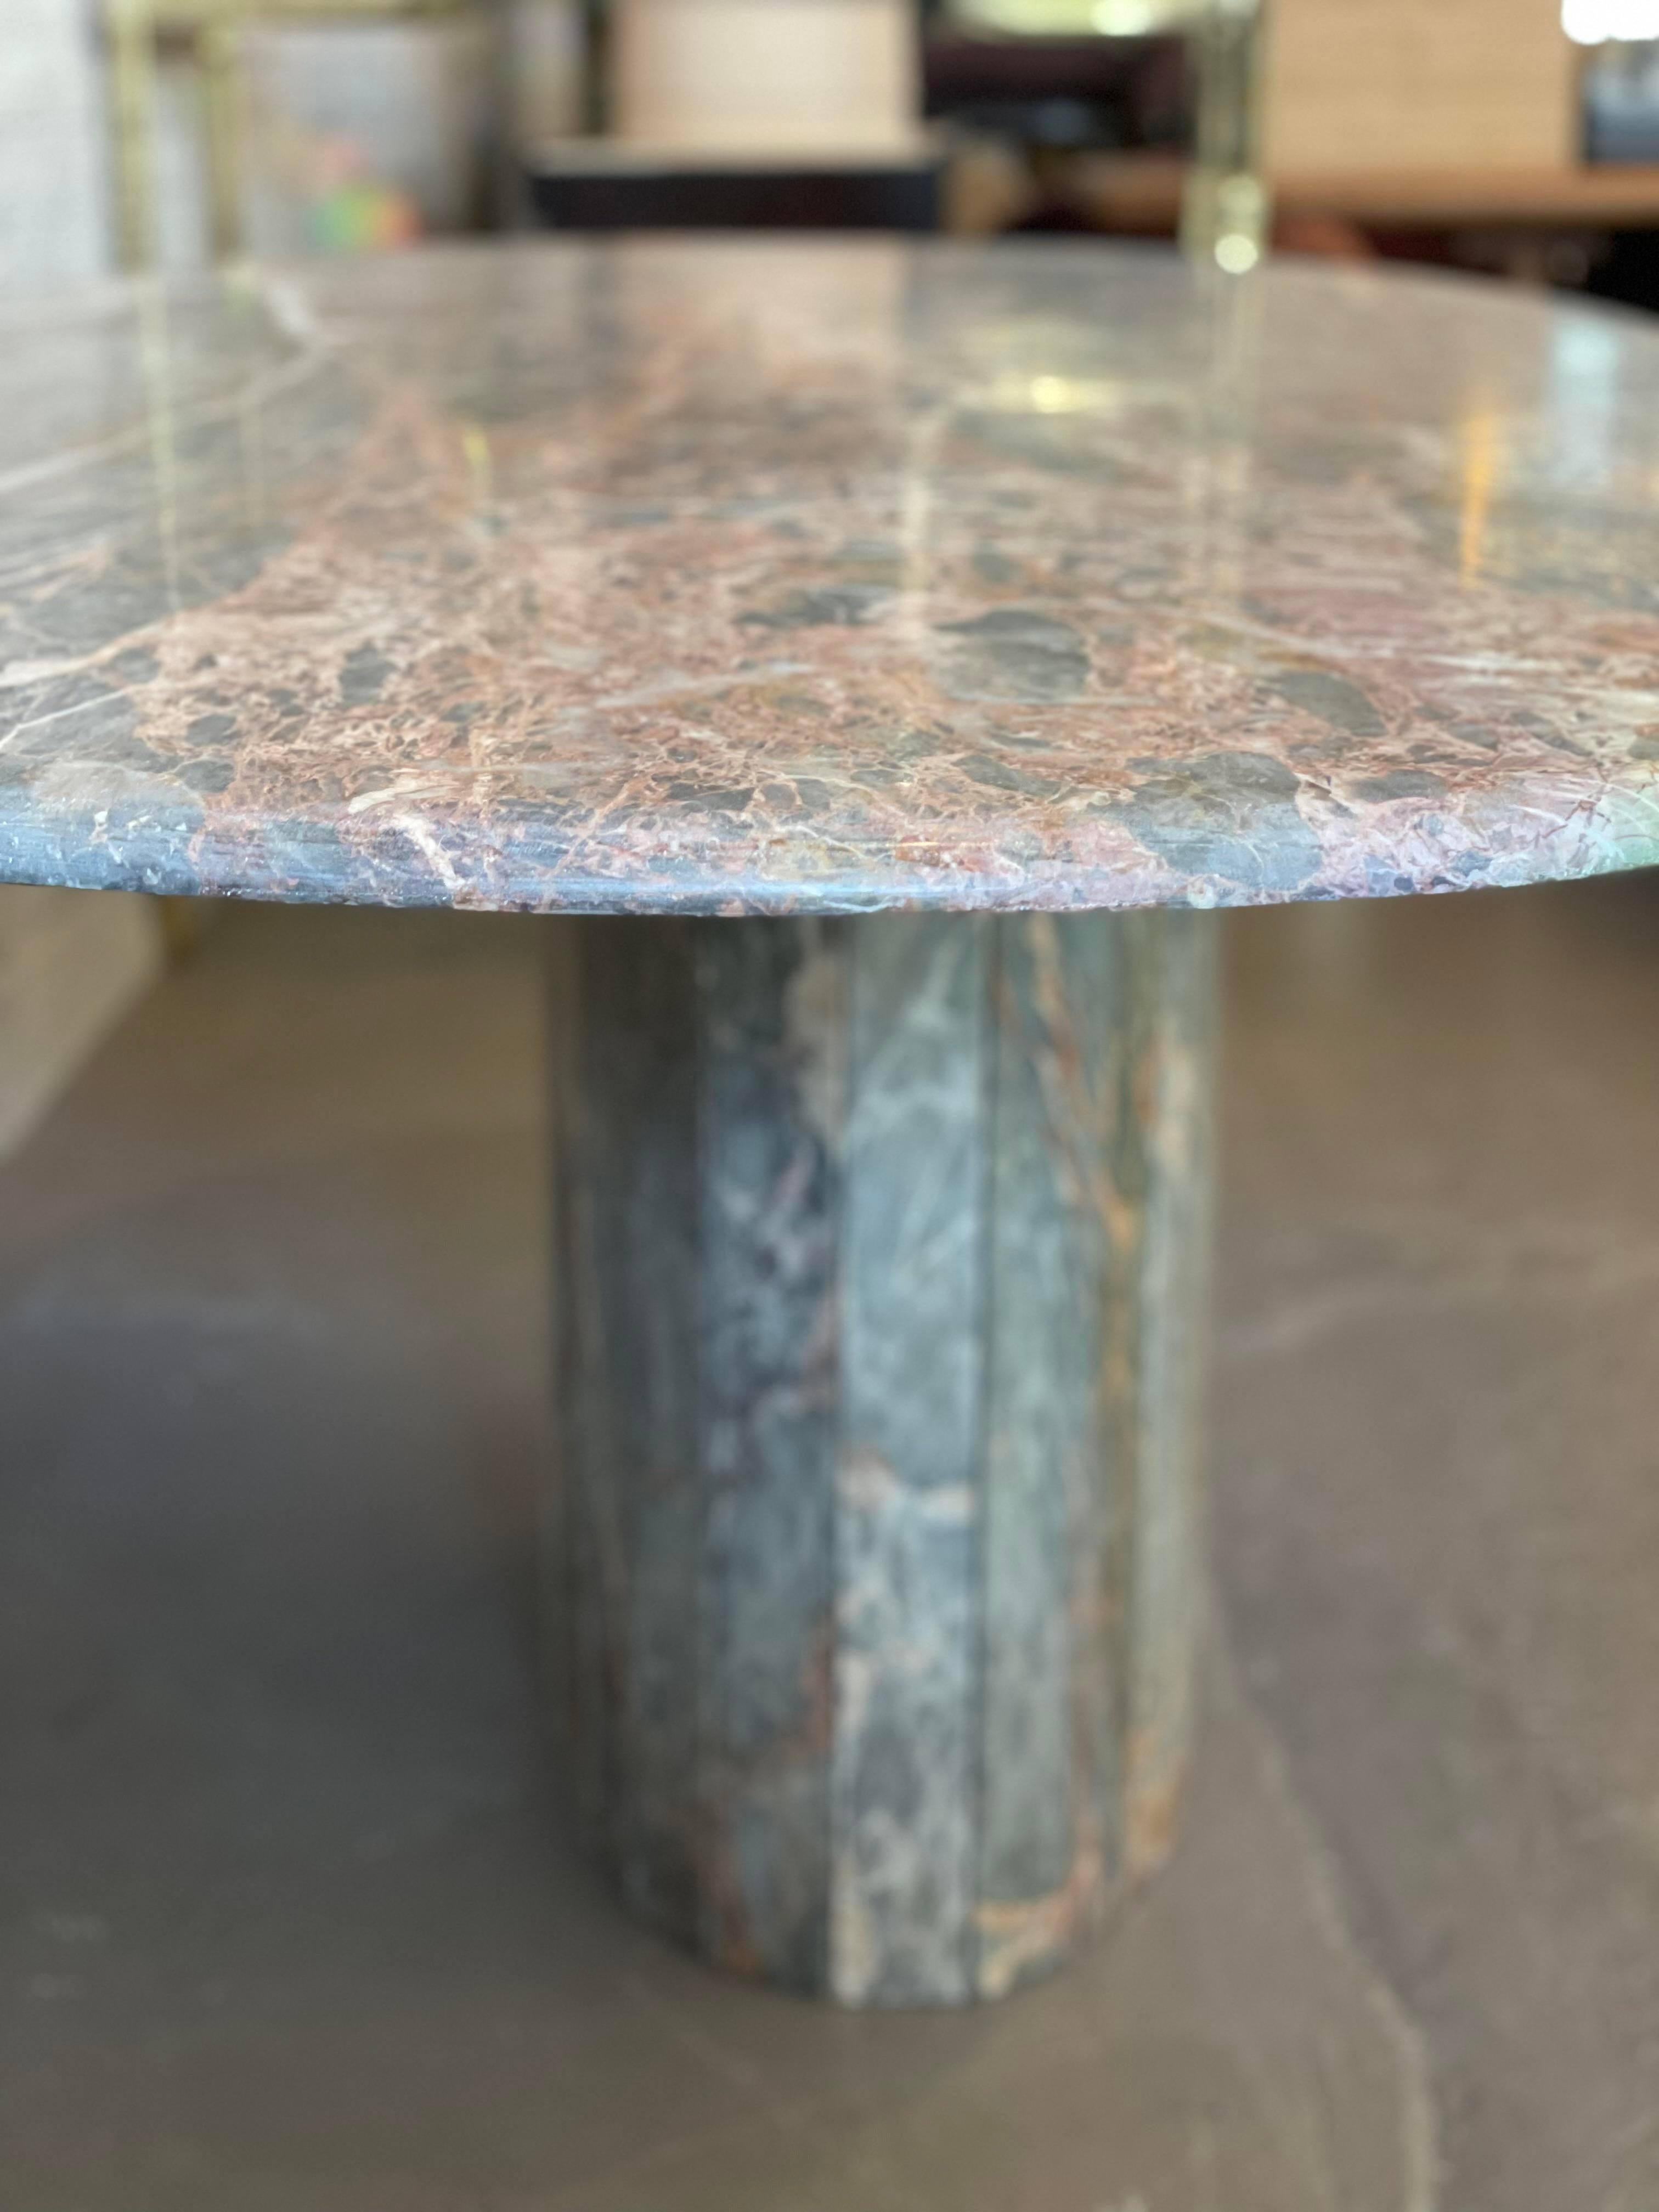 Unbelievably stunning. This table is grey and a multitude of pastel colors but primarily peach/pink. I had the lacquer coating professionally removed and sealed in a satin finish. Not too shiny, not too dull. From the 1970s to now…it’s beyond